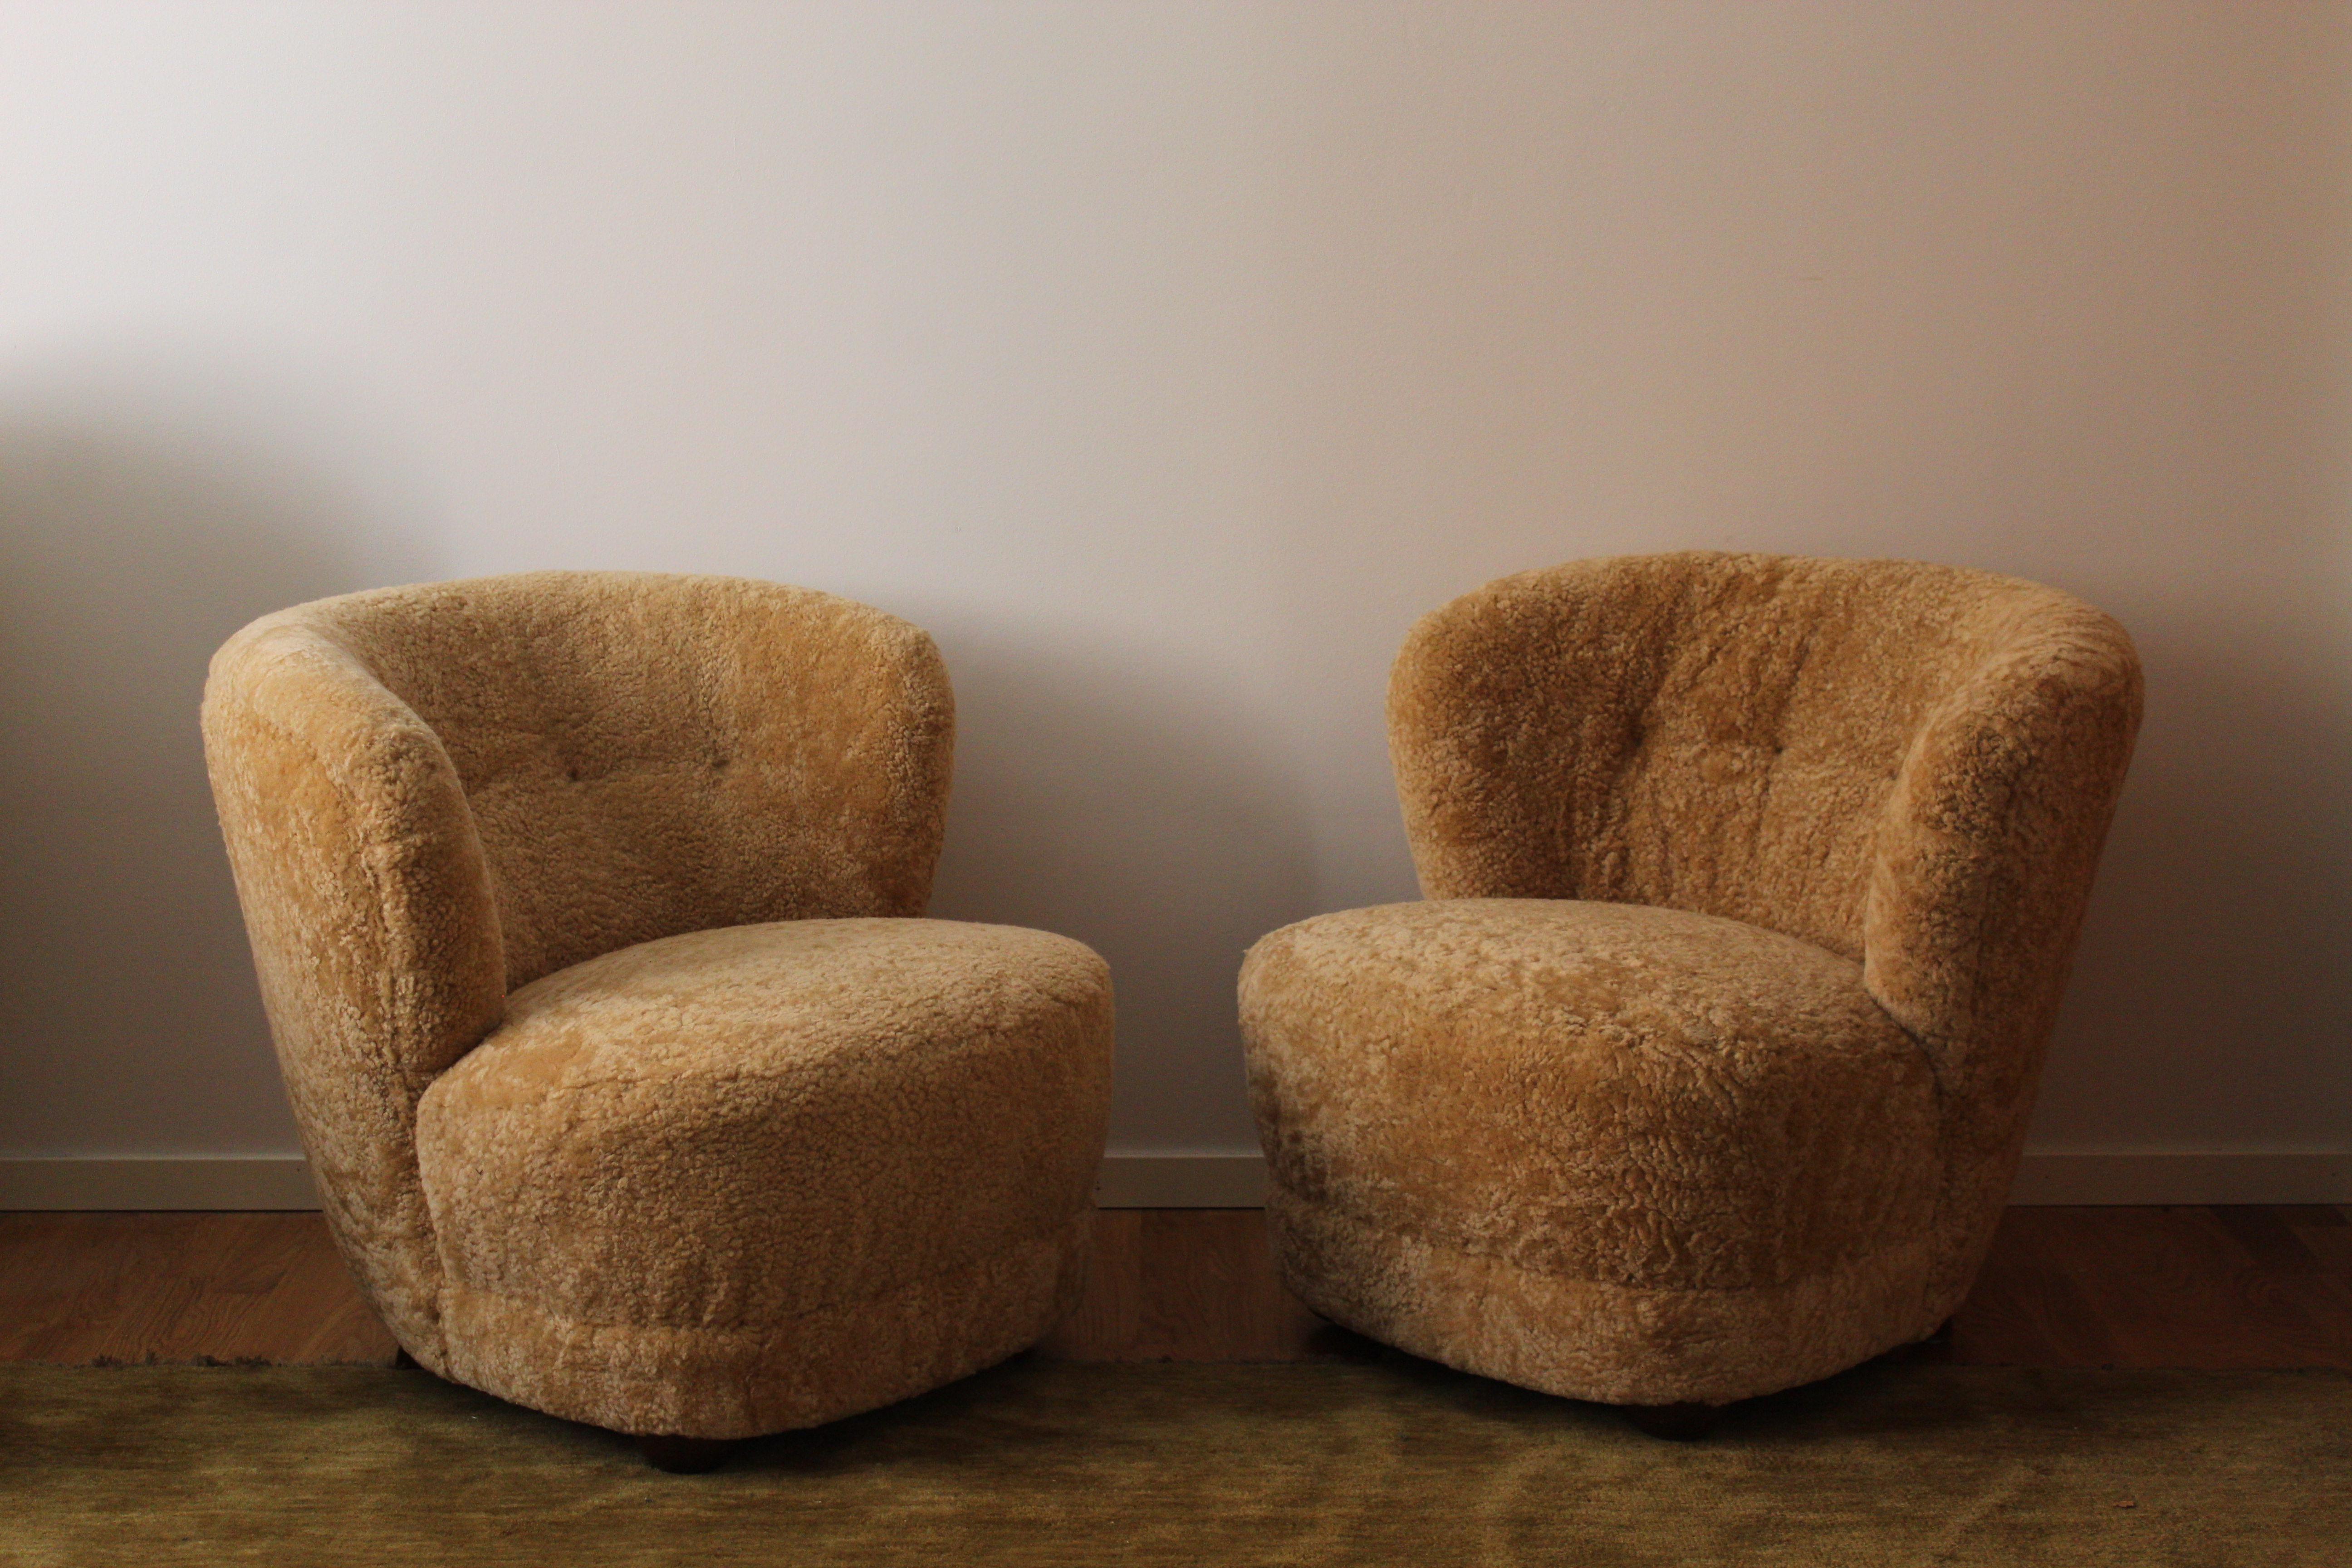 A pair of organic modernist lounge chairs / slipper chairs. Designed and produced in Denmark, 1940s. Reupholstered in brand new authentic shearling upholstery. 

Similar in style to works by designers such as Flemming Lassen, Gio Ponti, Vladimir